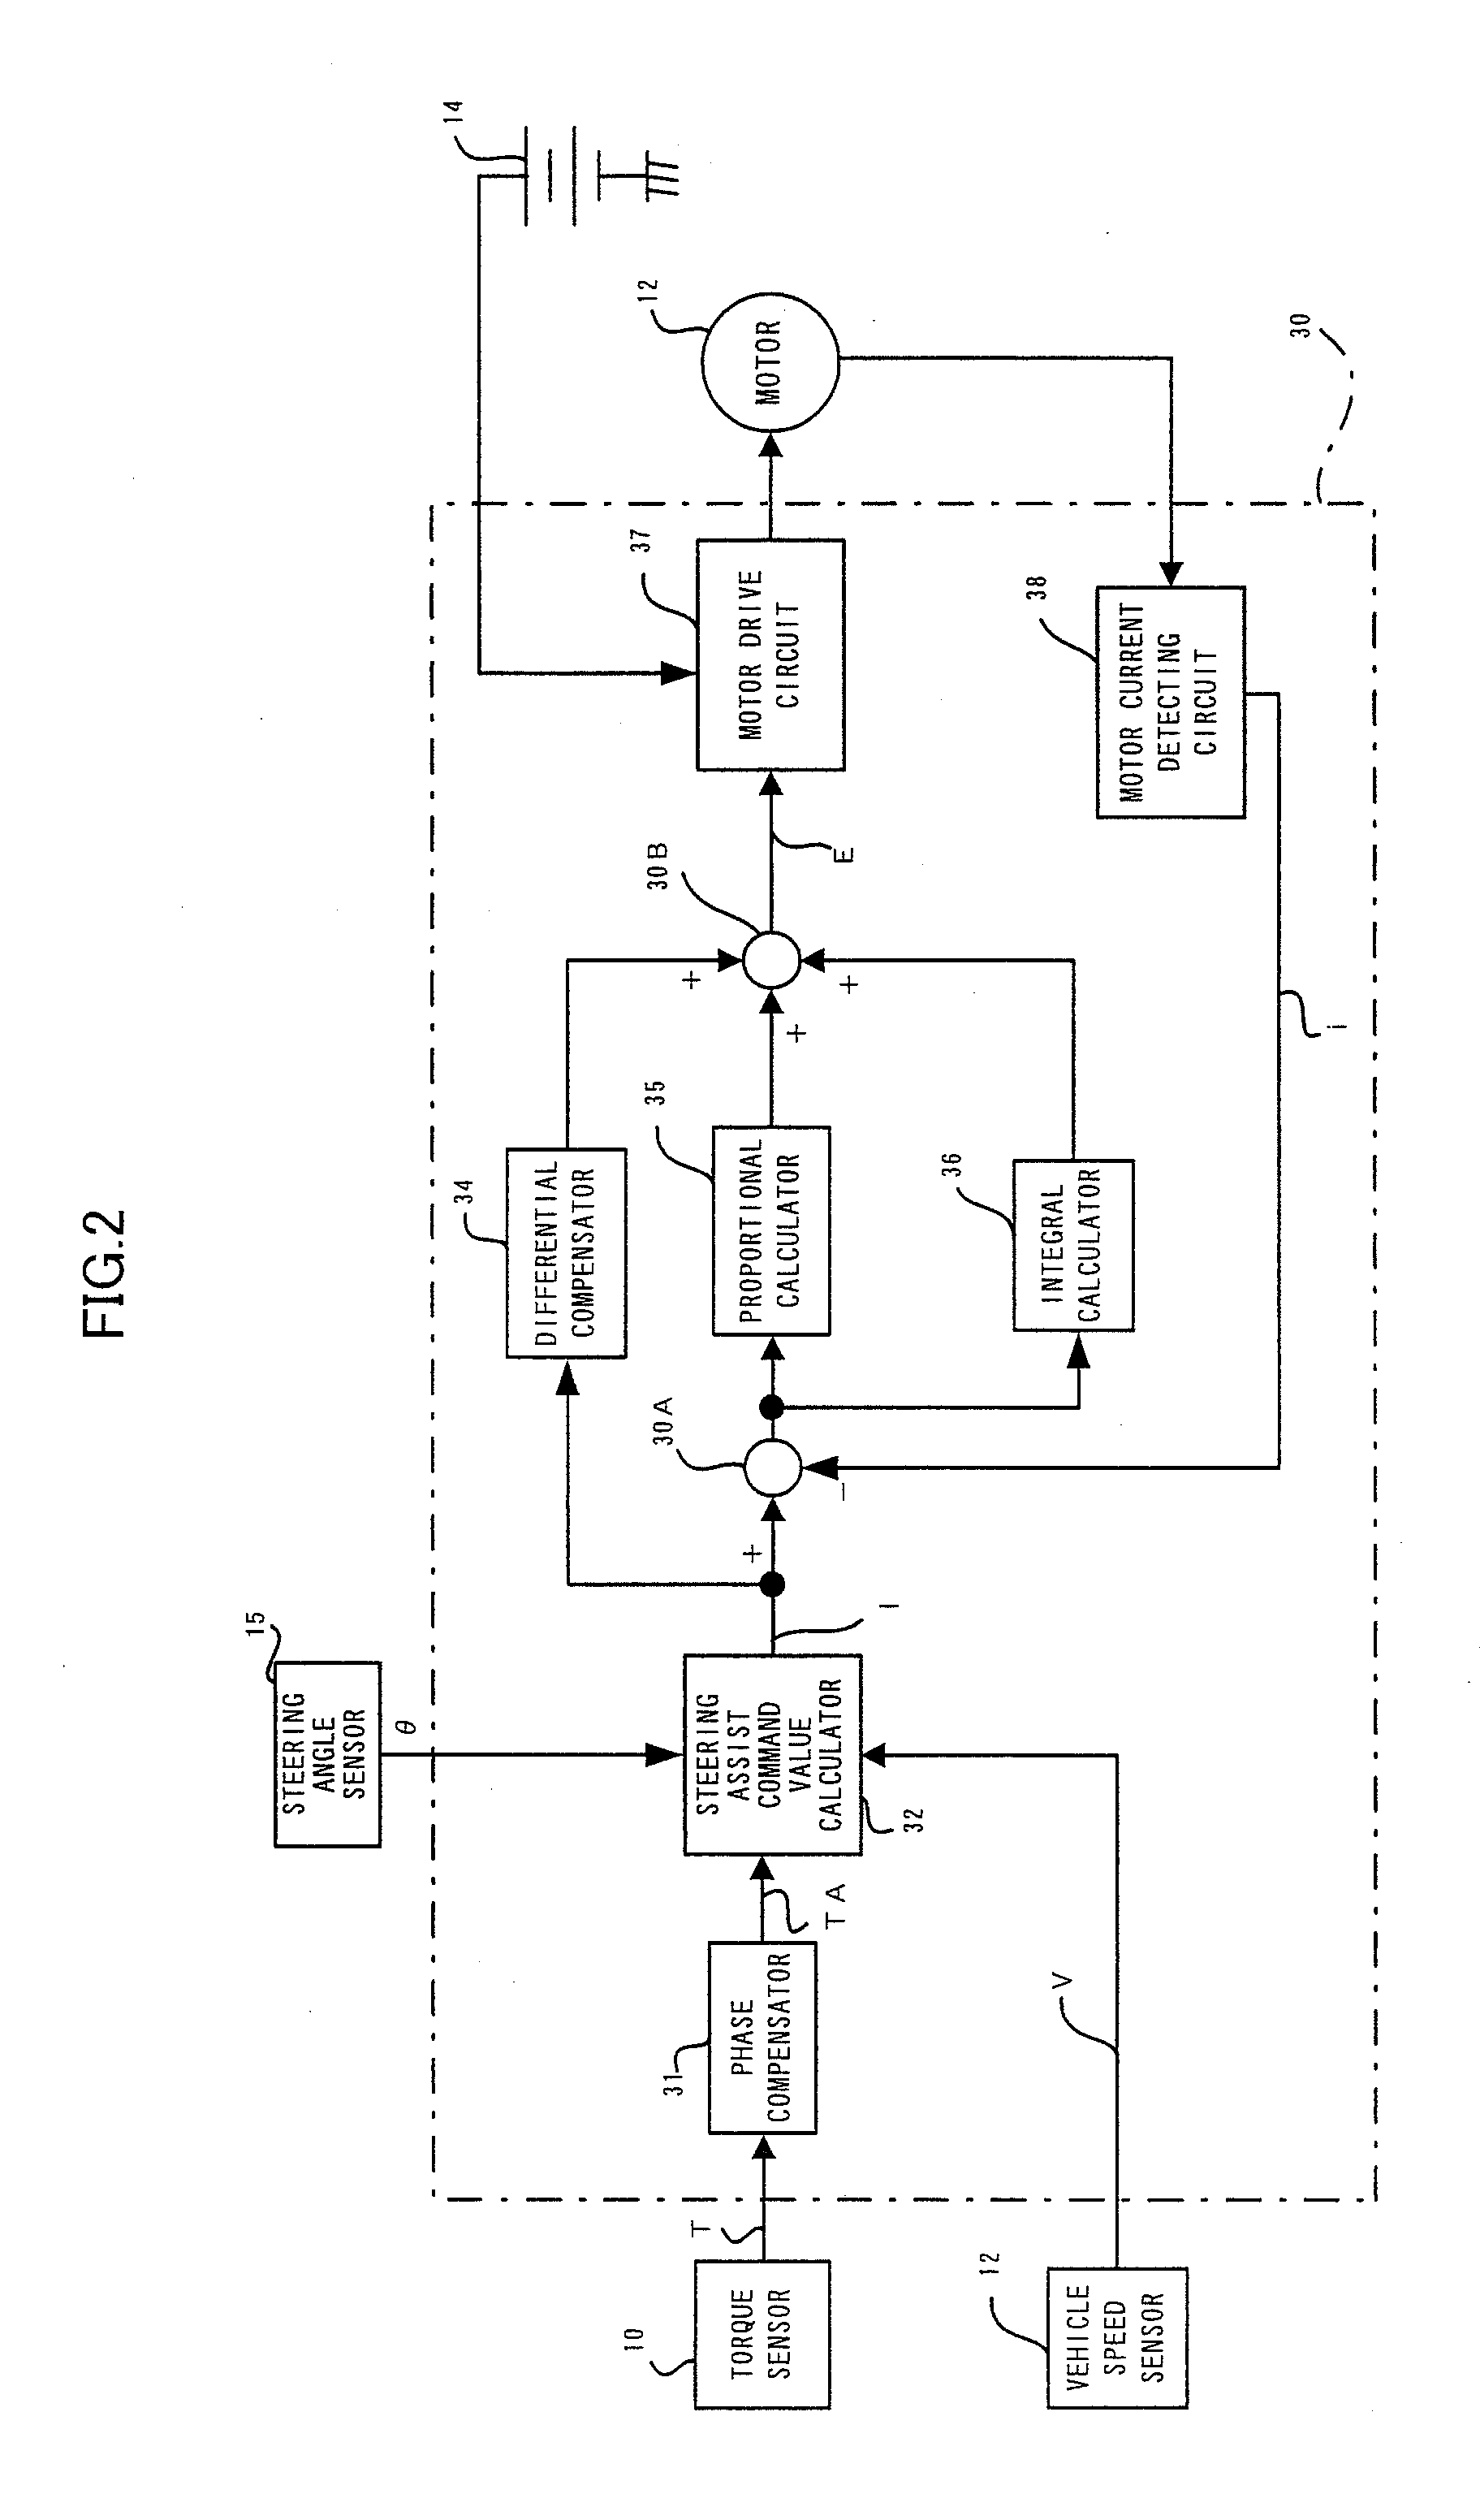 Control unit of electric power steering apparatus